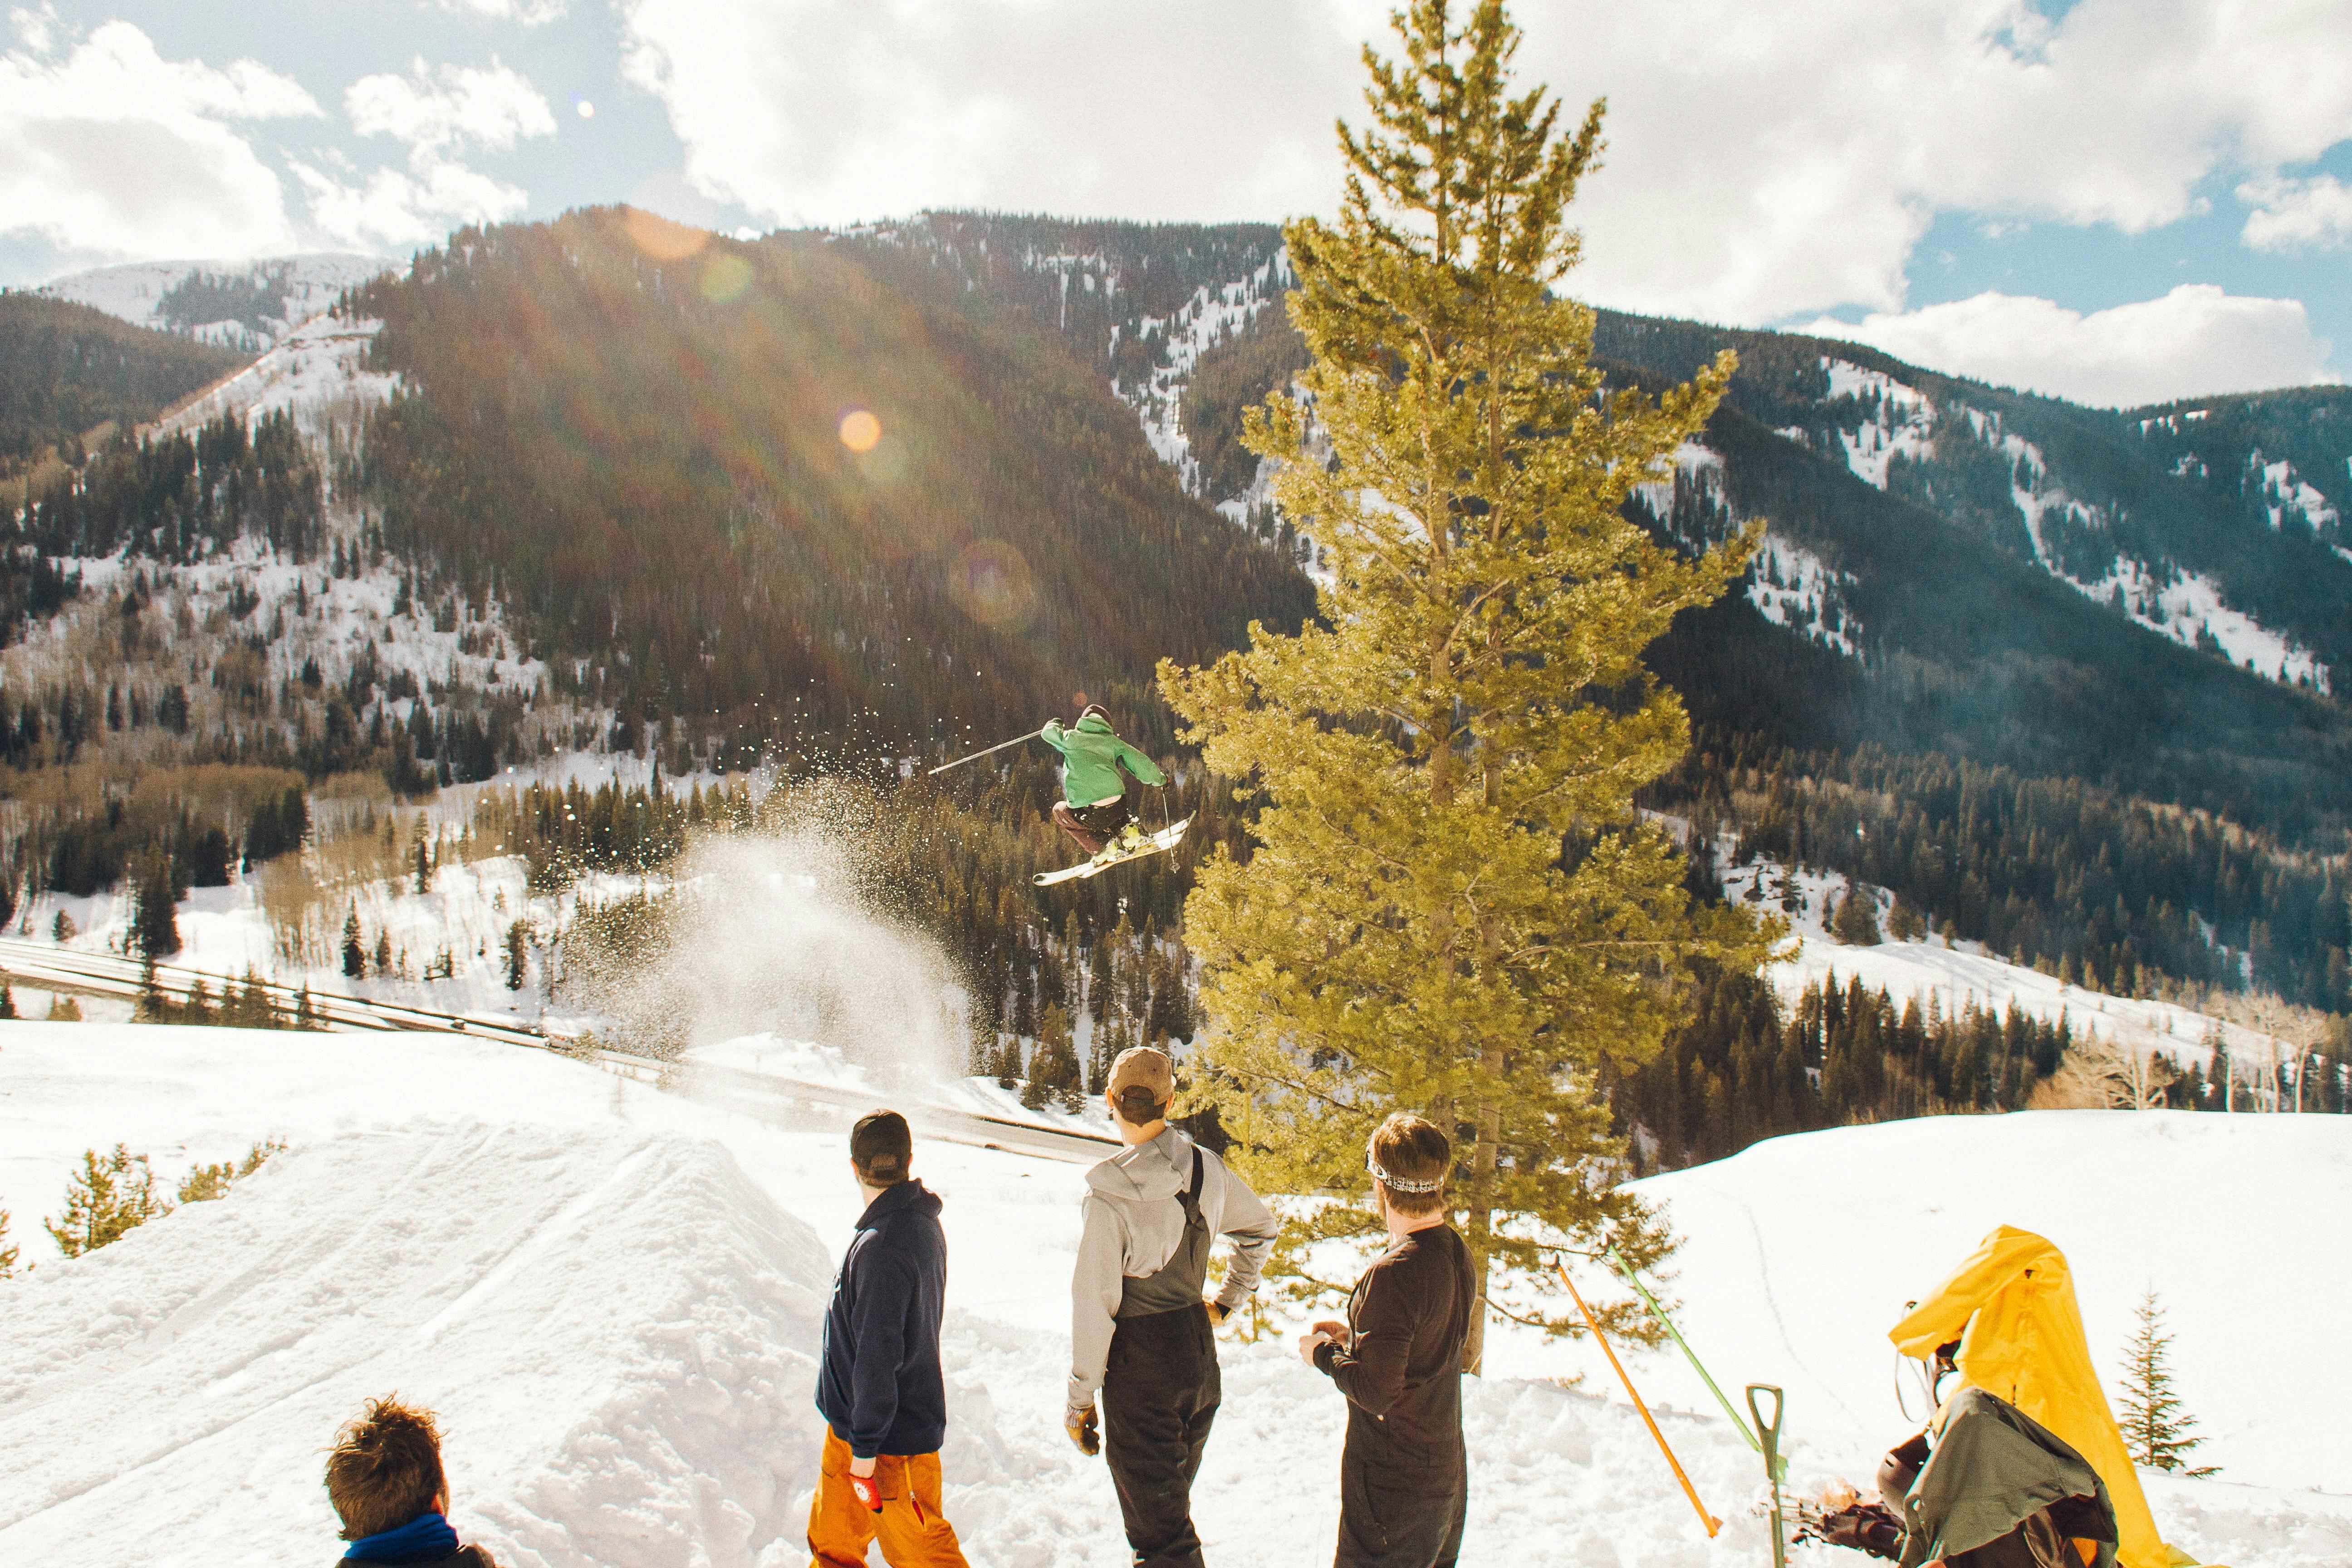 A group of people in long-sleeves and no jackets watch someone jumping on their skis. 